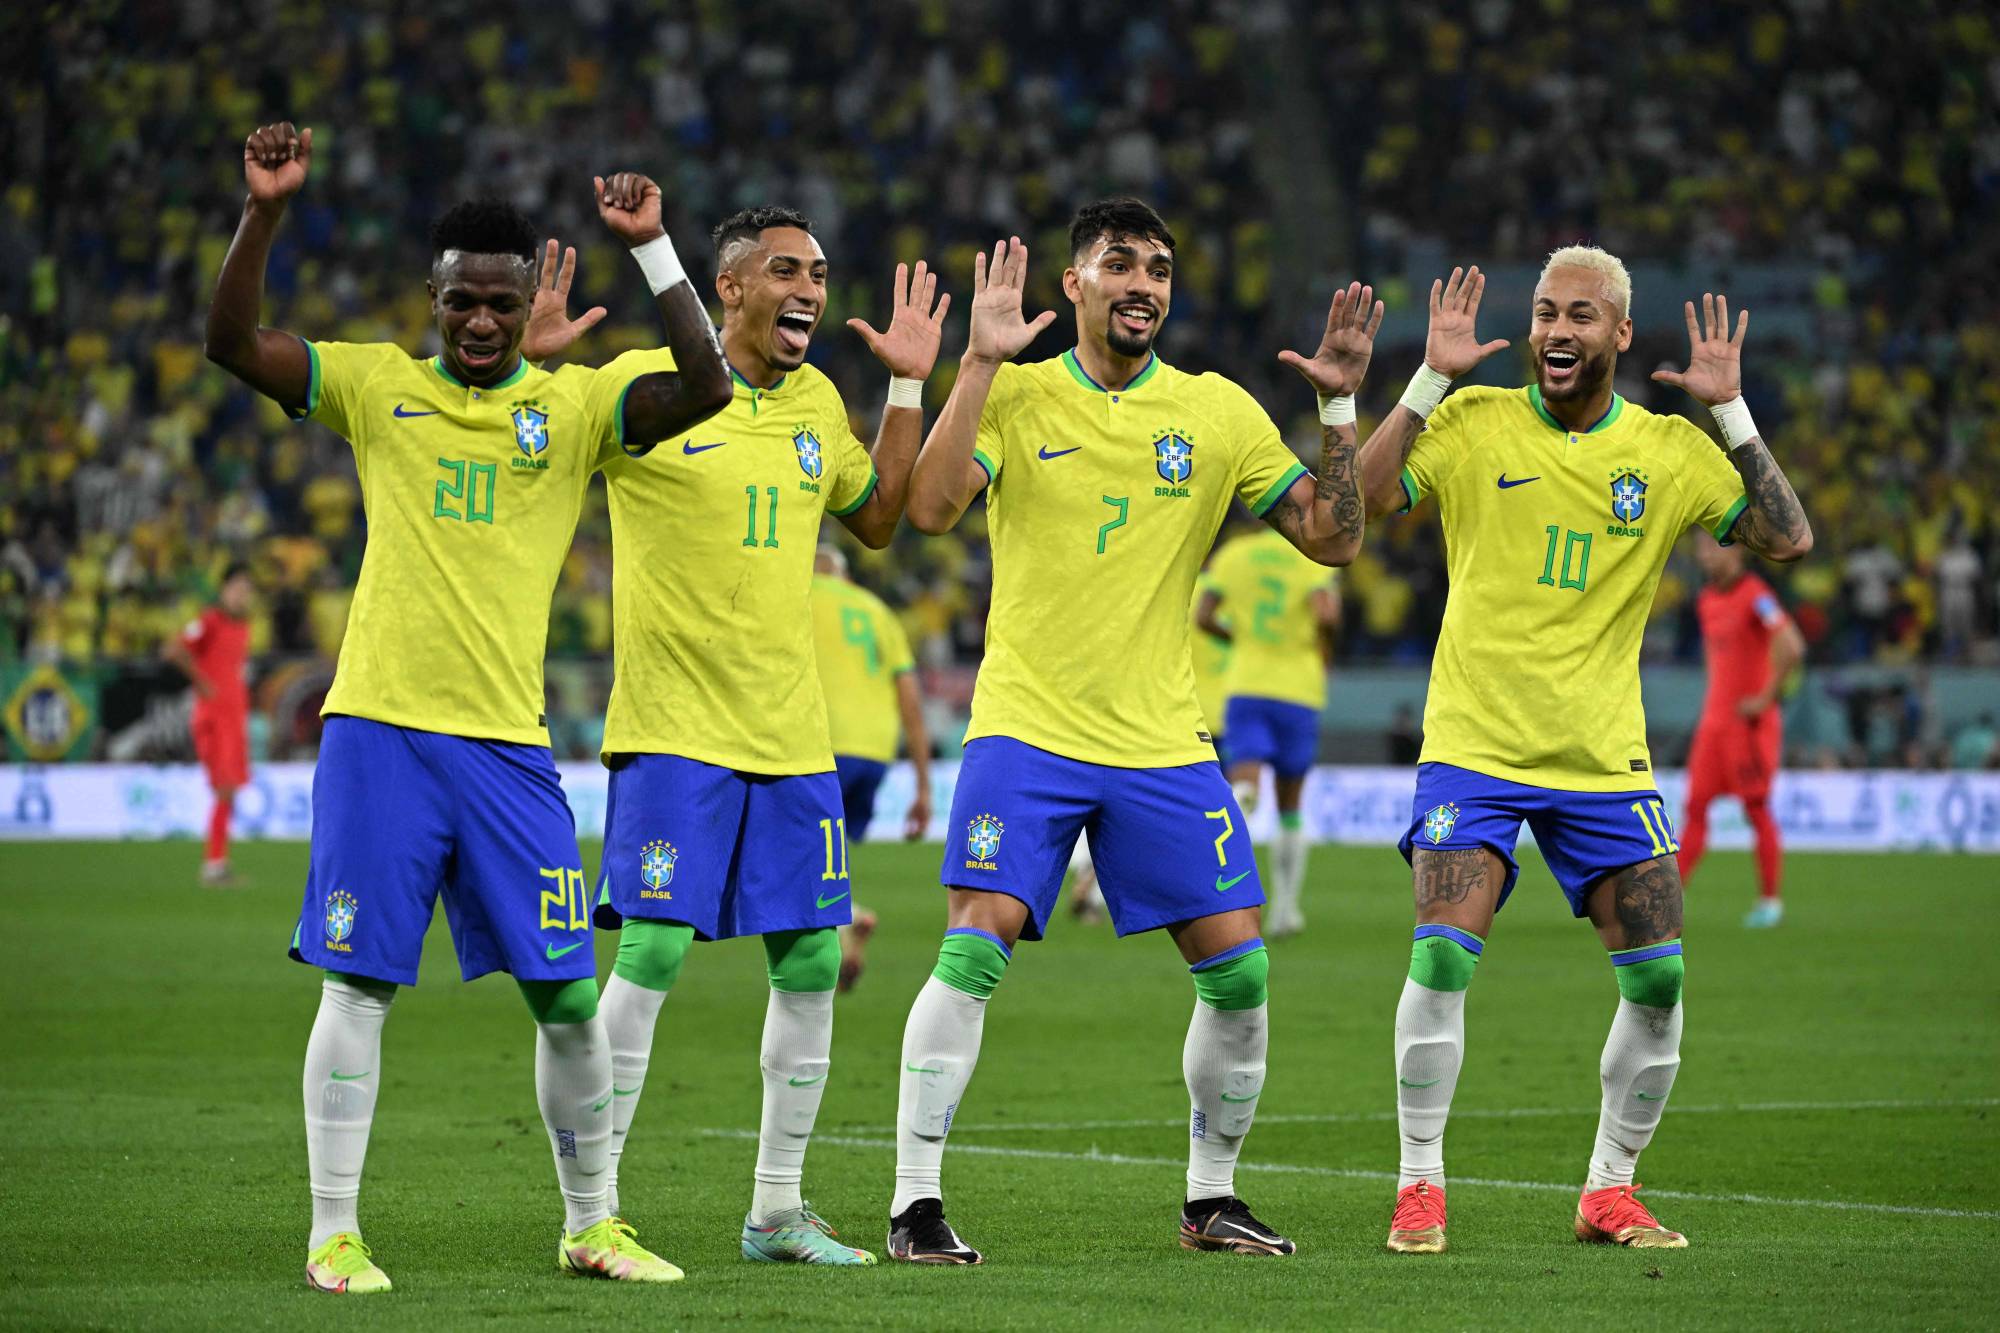 More than a game – the importance of football to Brazilian culture